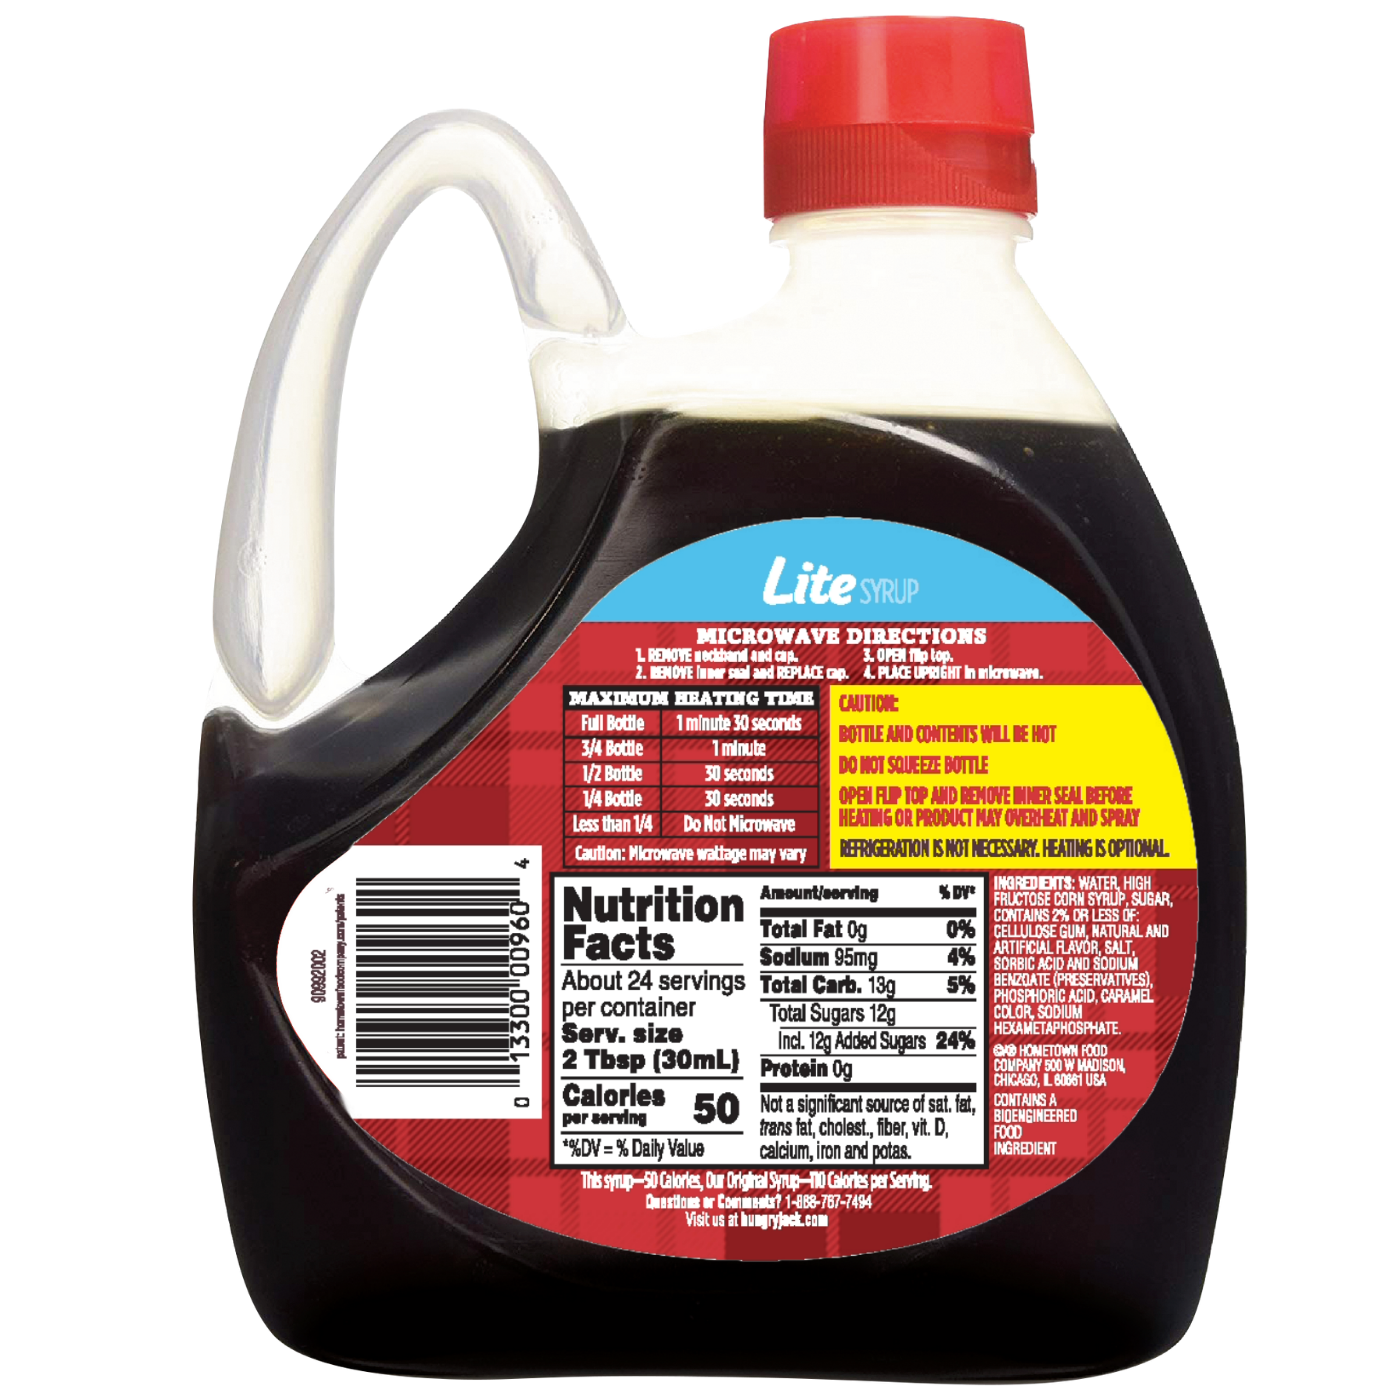 Hungry Jack Syrup Lite 6 units per case 24.0 oz